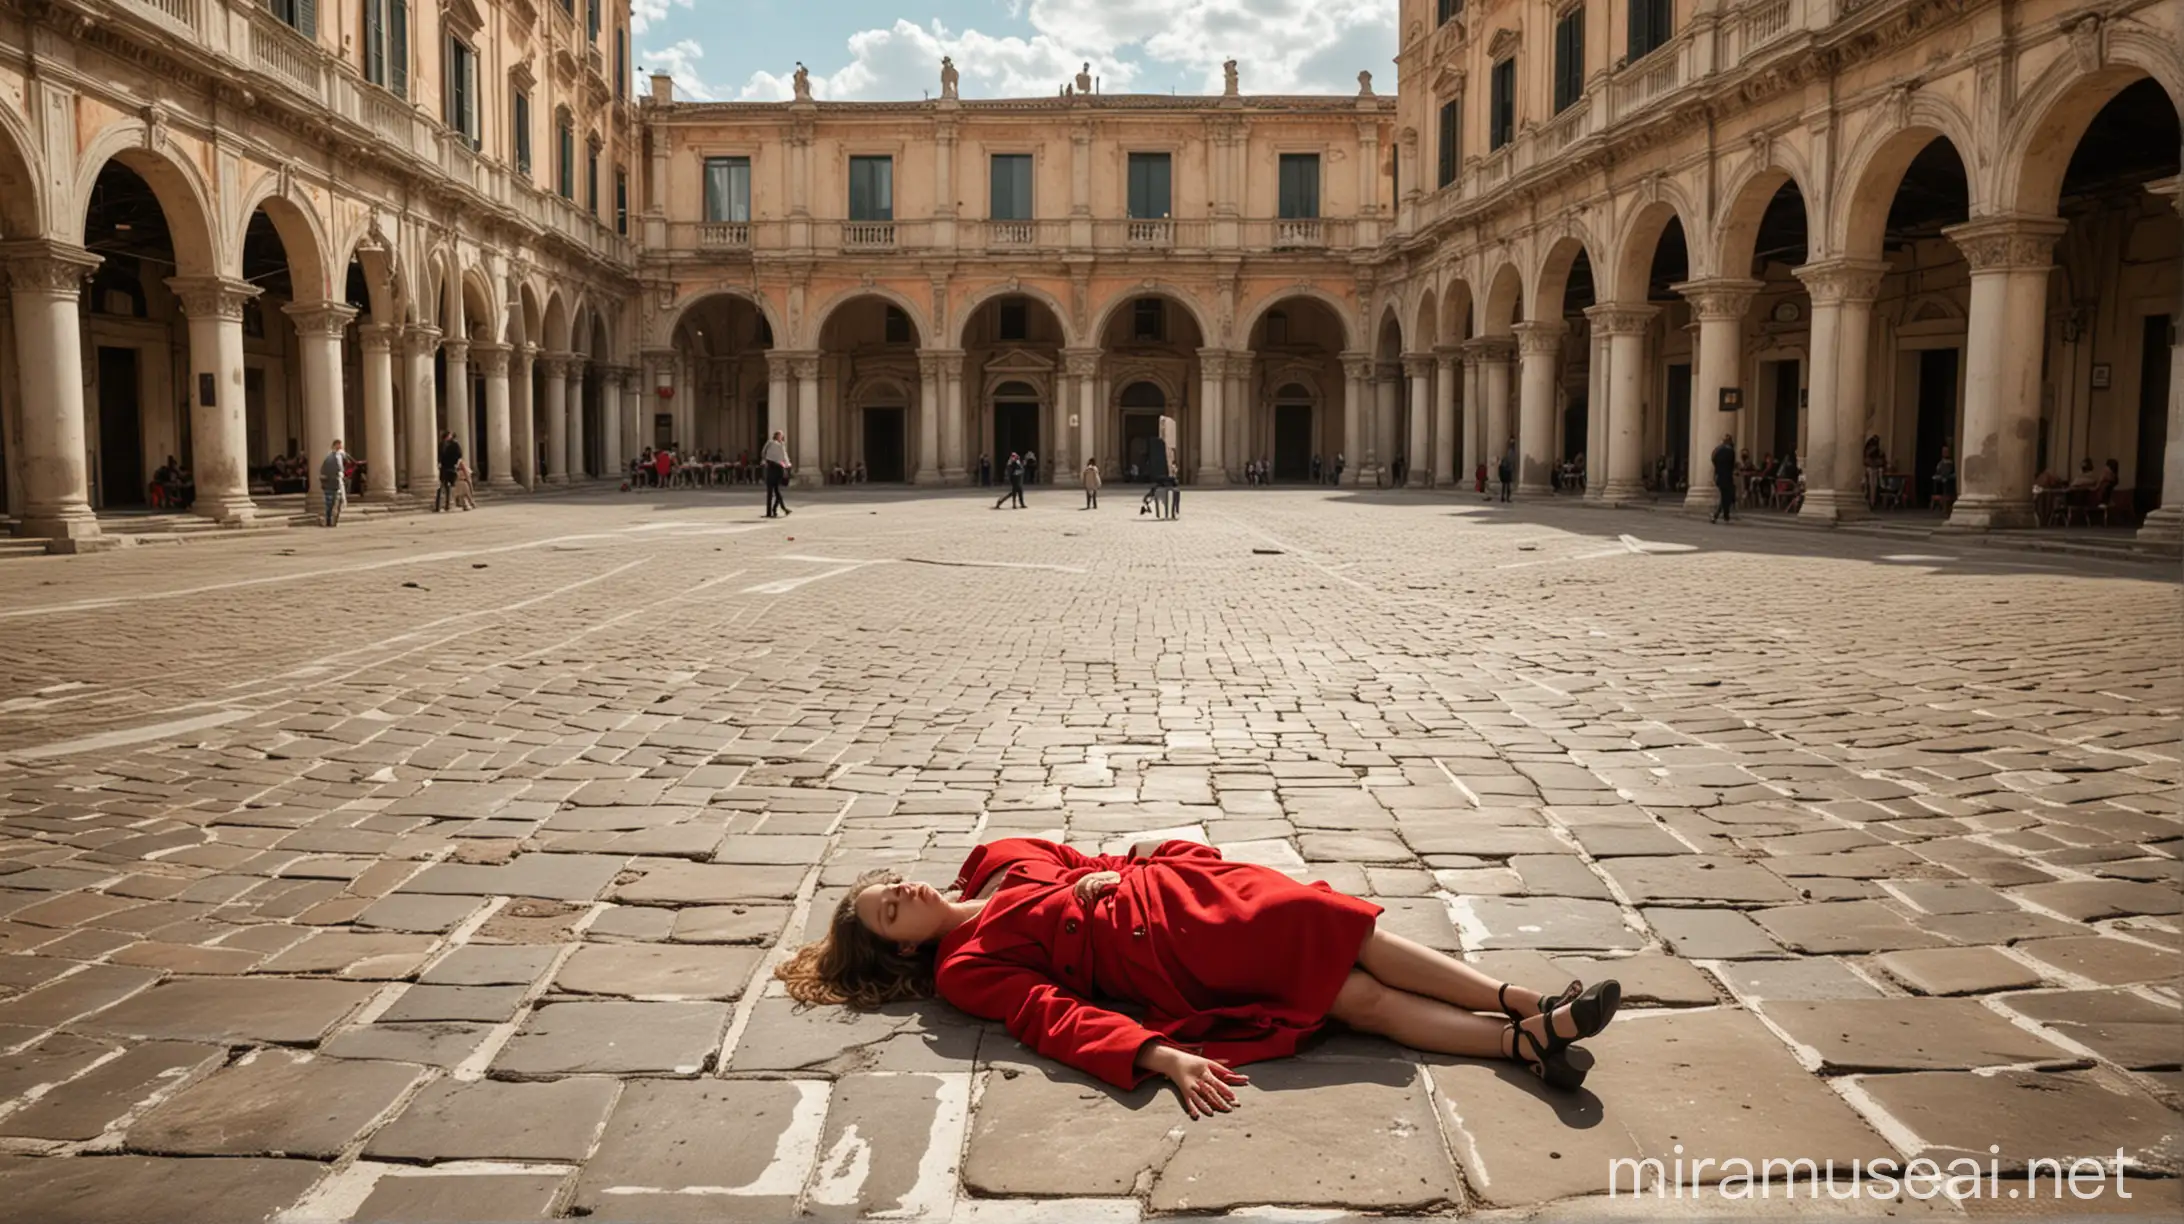 woman lying on the ground, with a red coat, in the center of a square of an Italian city, sun, around baroque buildings, de Chirico atmosphere